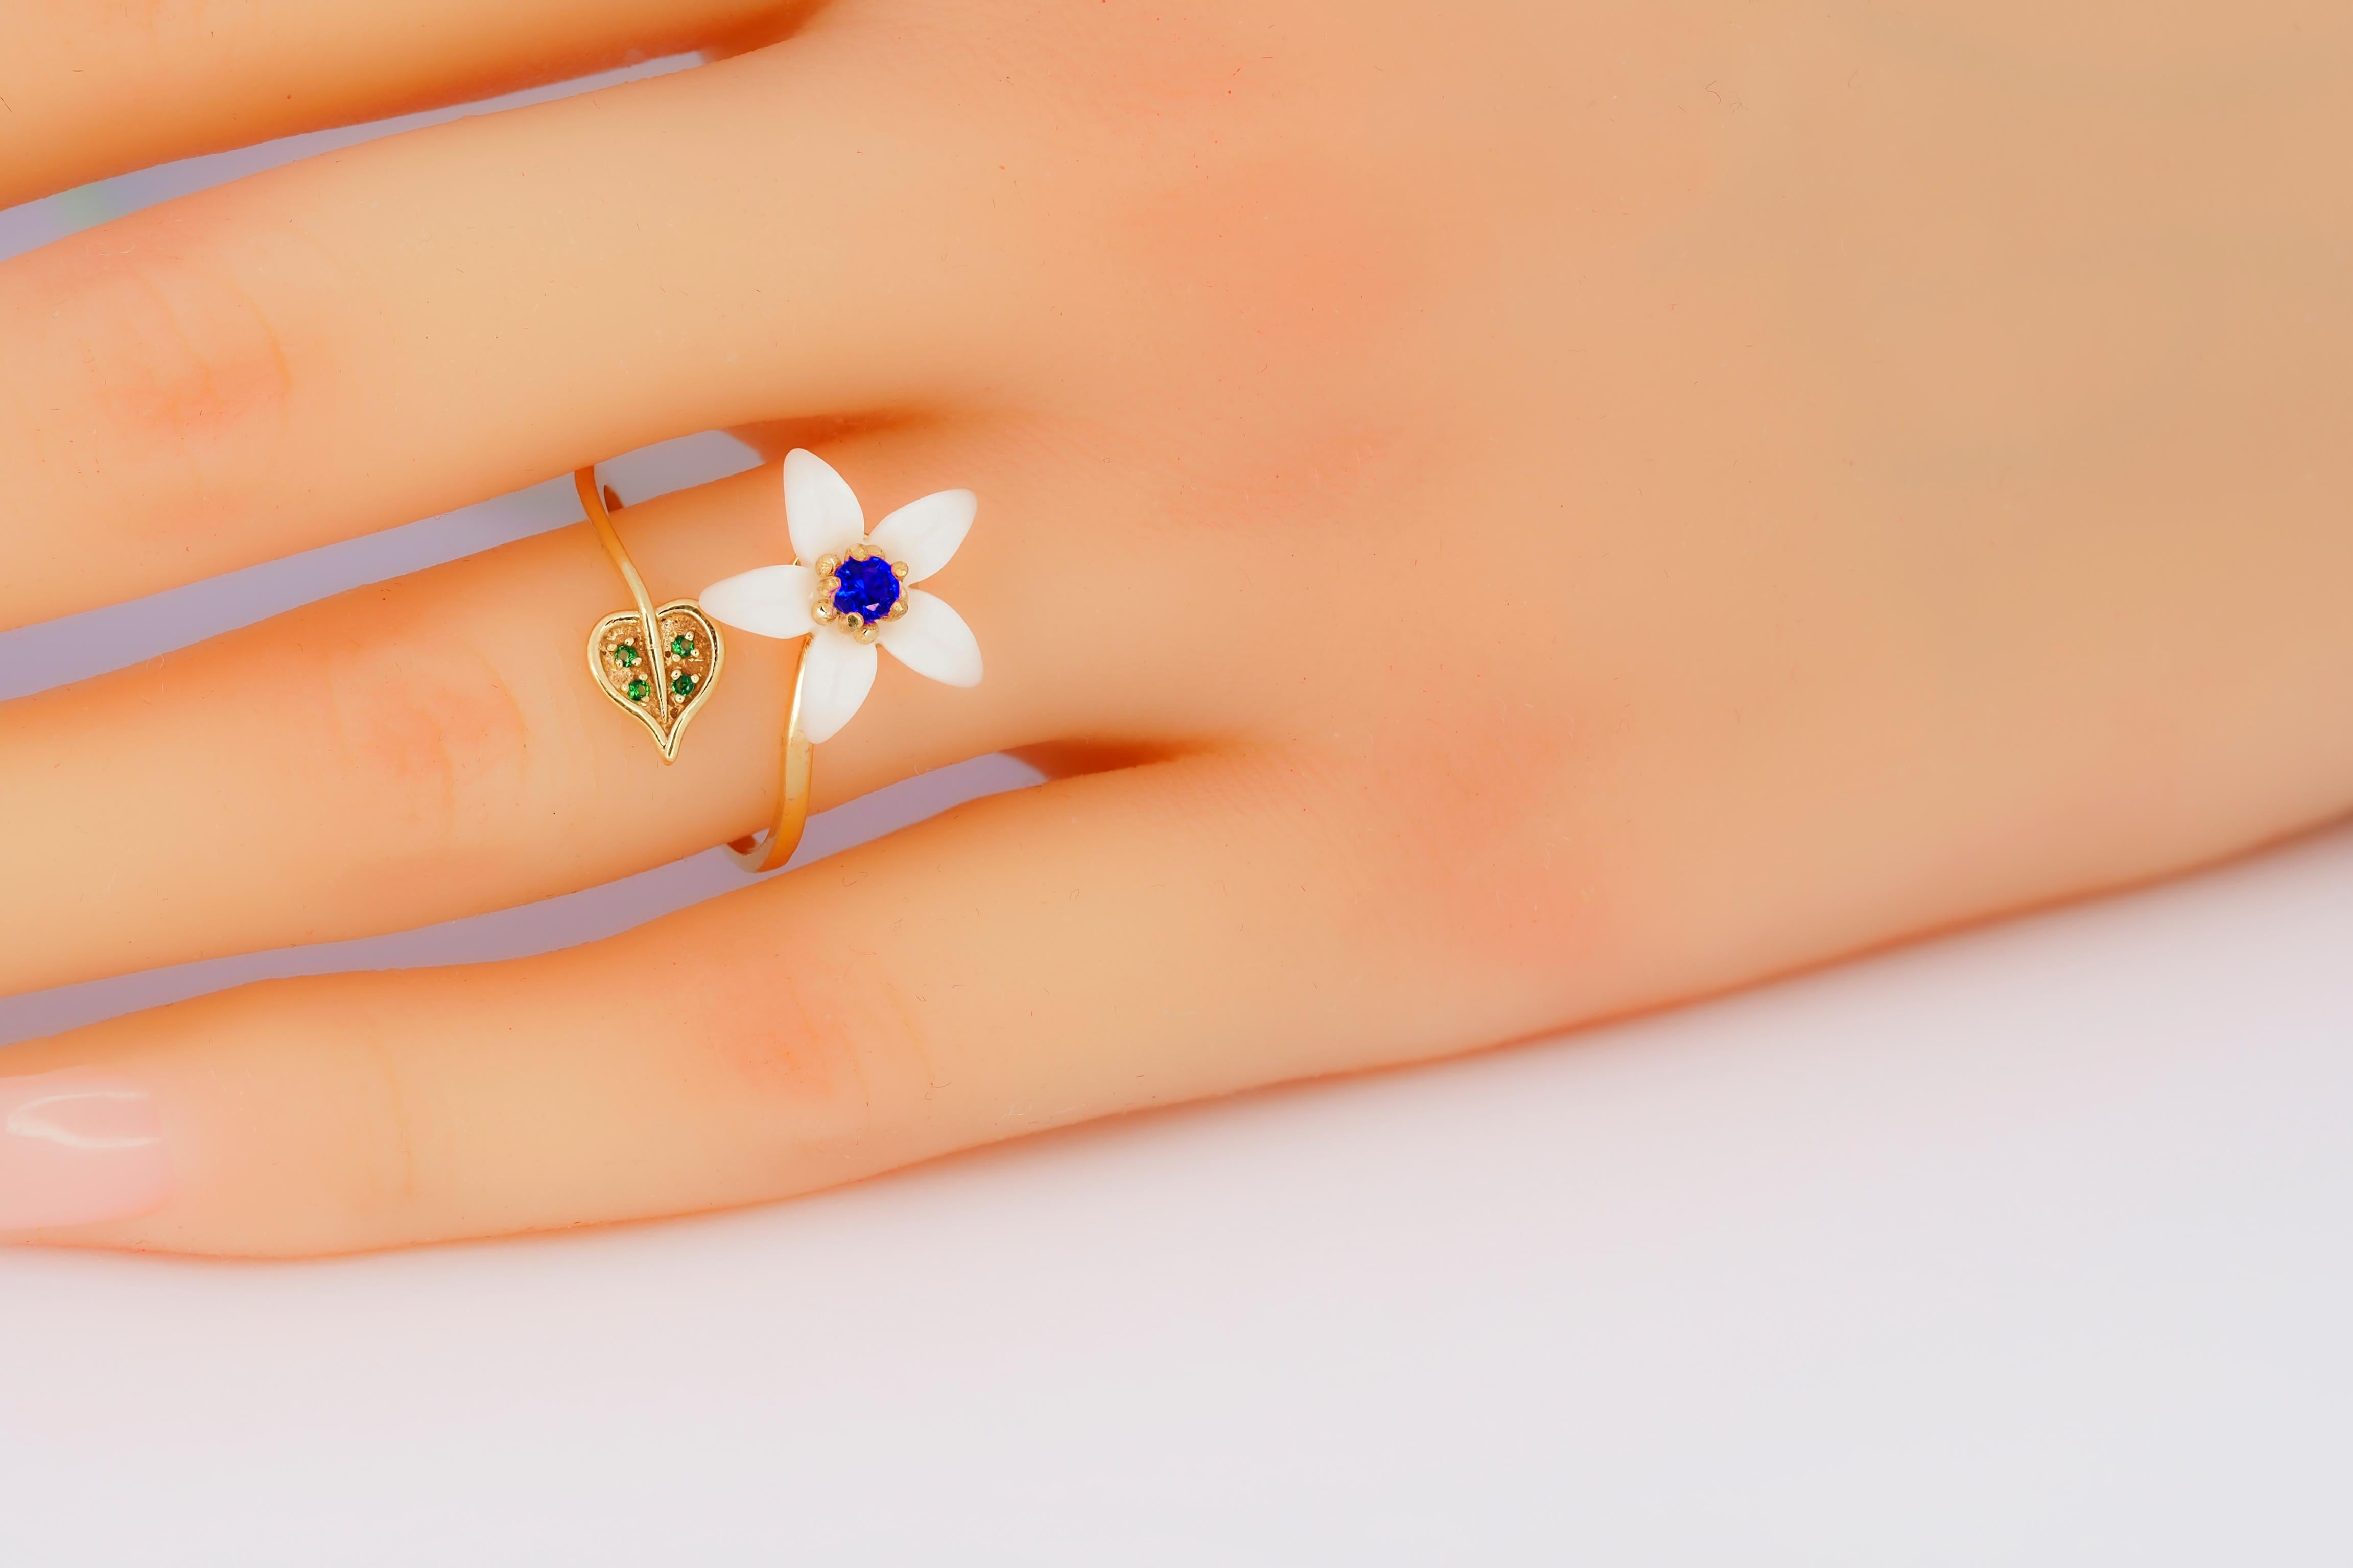 Carved Flower 14k ring with gemstones.
Open ended Lab sapphire ring in 14k gold. Adjustable ring. Carved mother of pearl flower ring. Flower gold ring. Round blue sapphire vintage ring. Nature inspired ring with mother of pearl flower. Shell flower